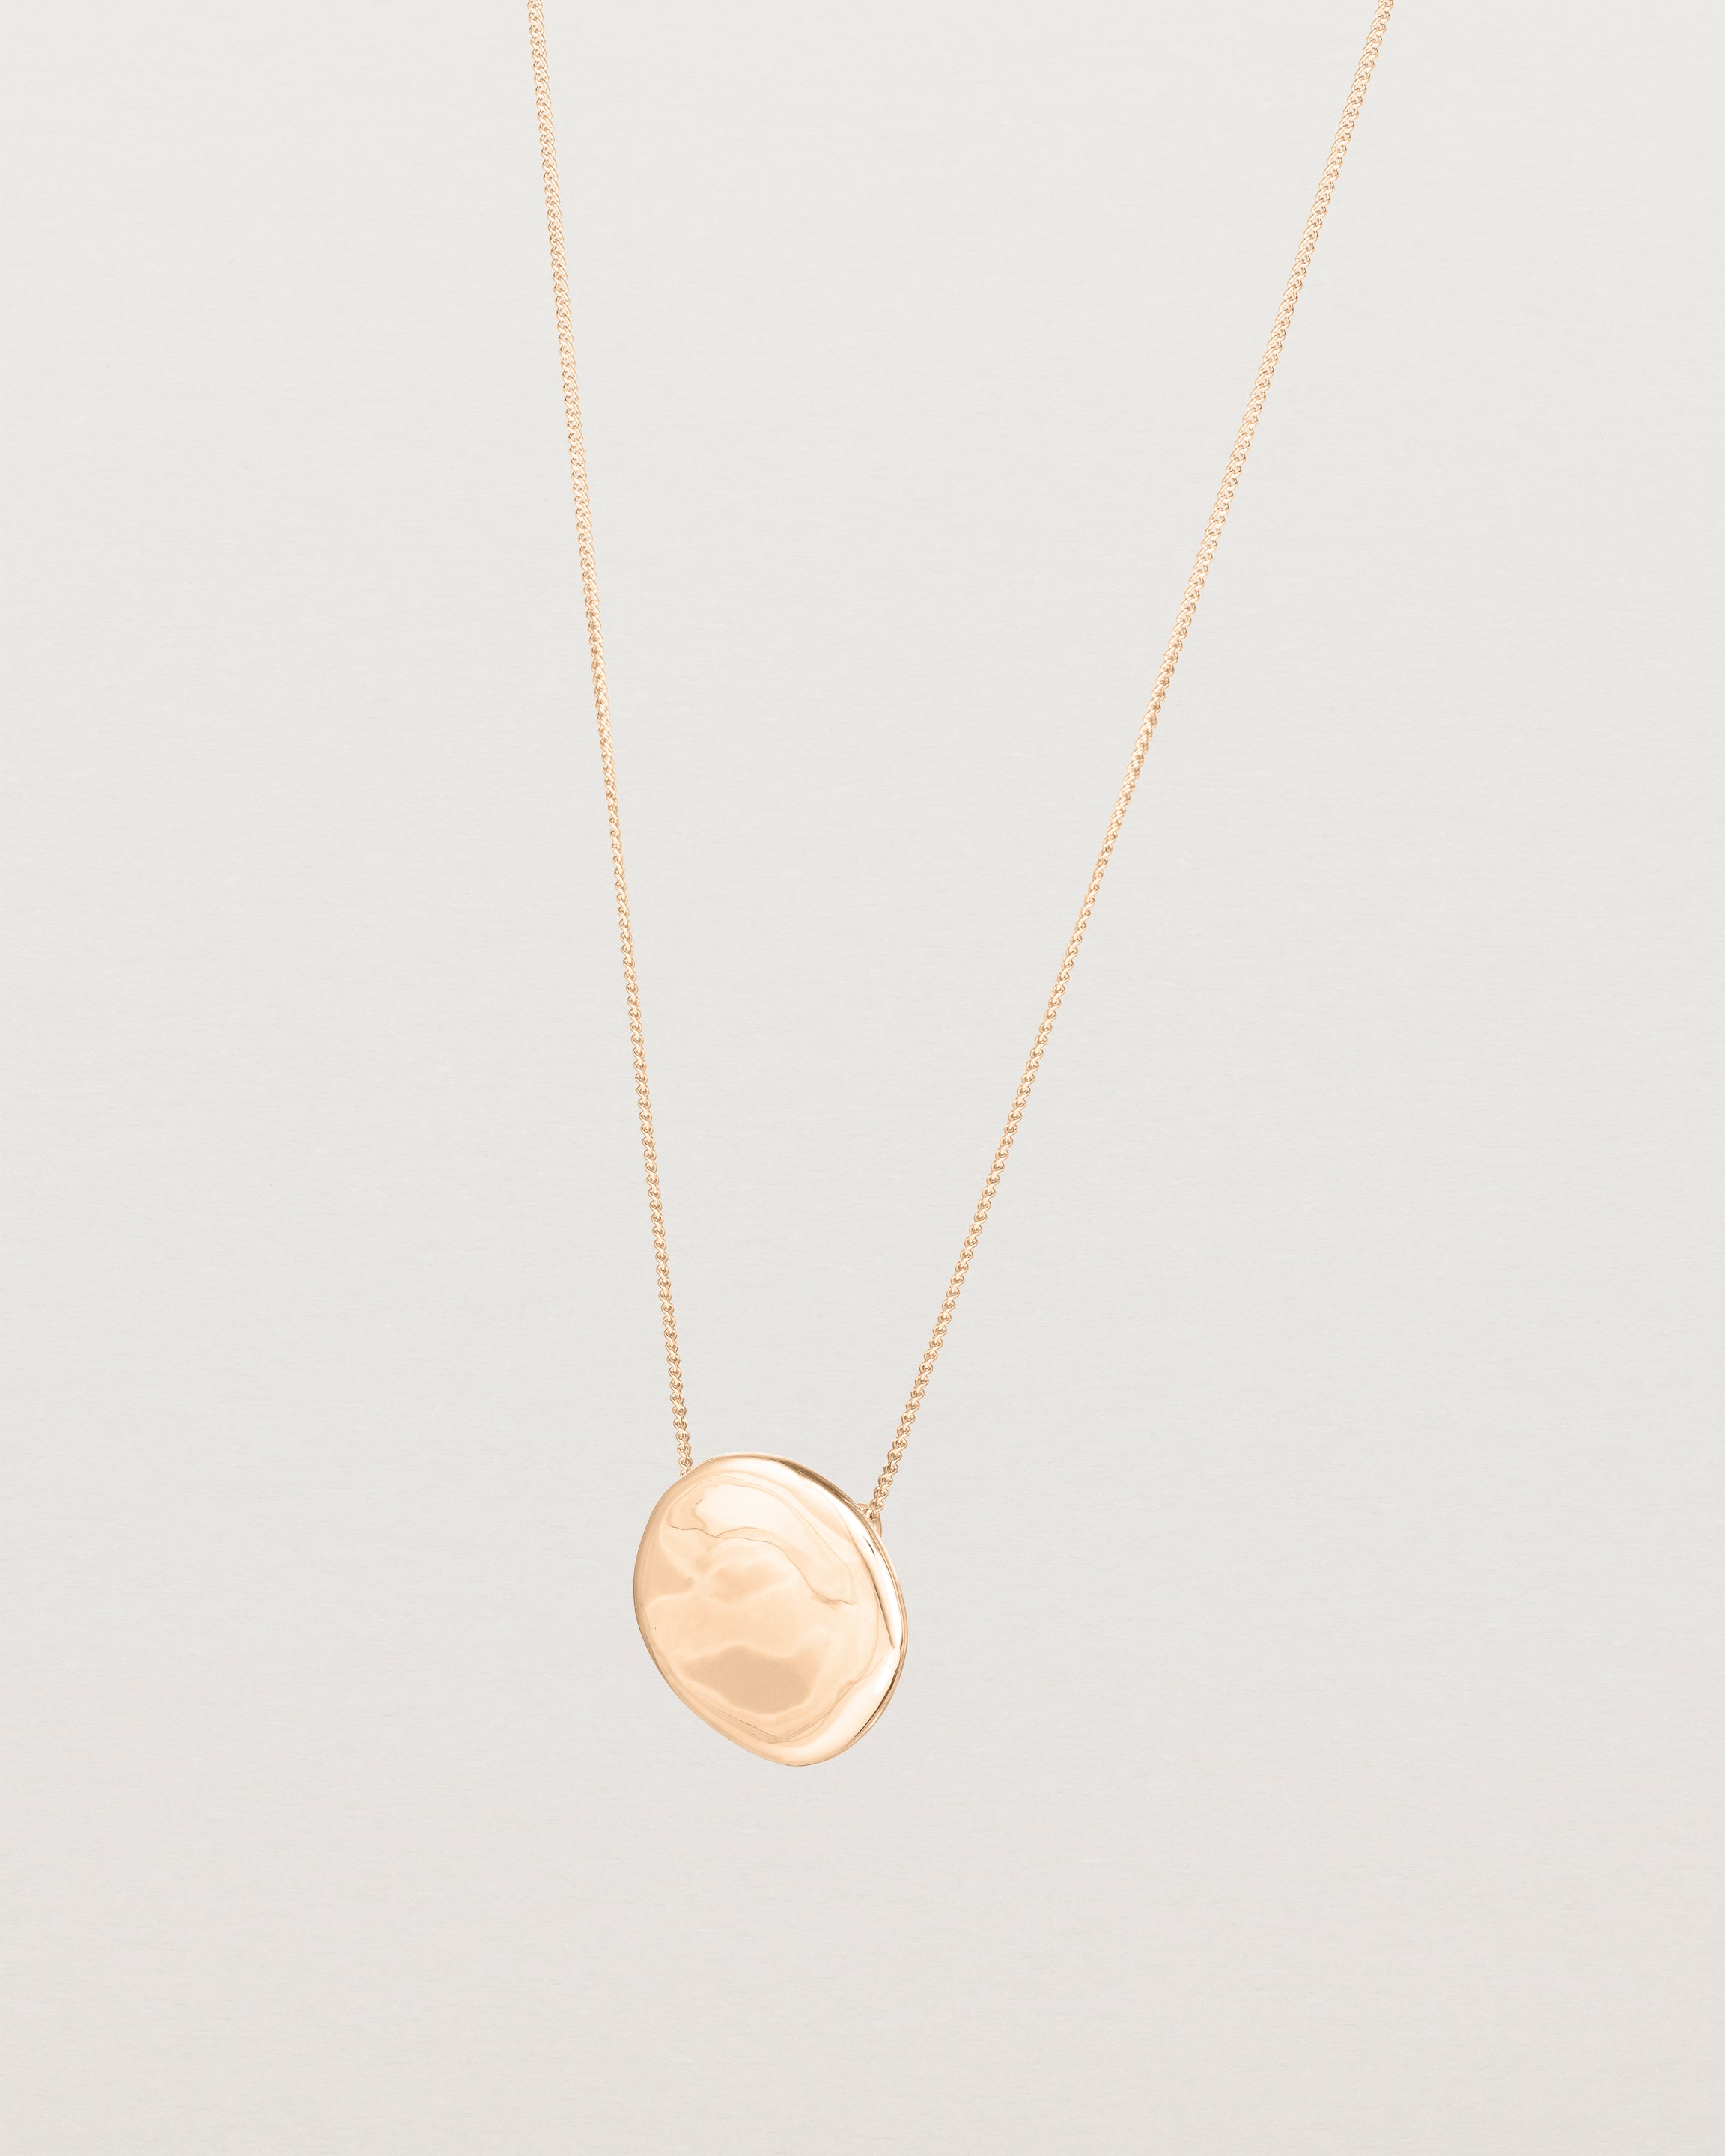 Angled view of the Mana Necklace in rose gold.